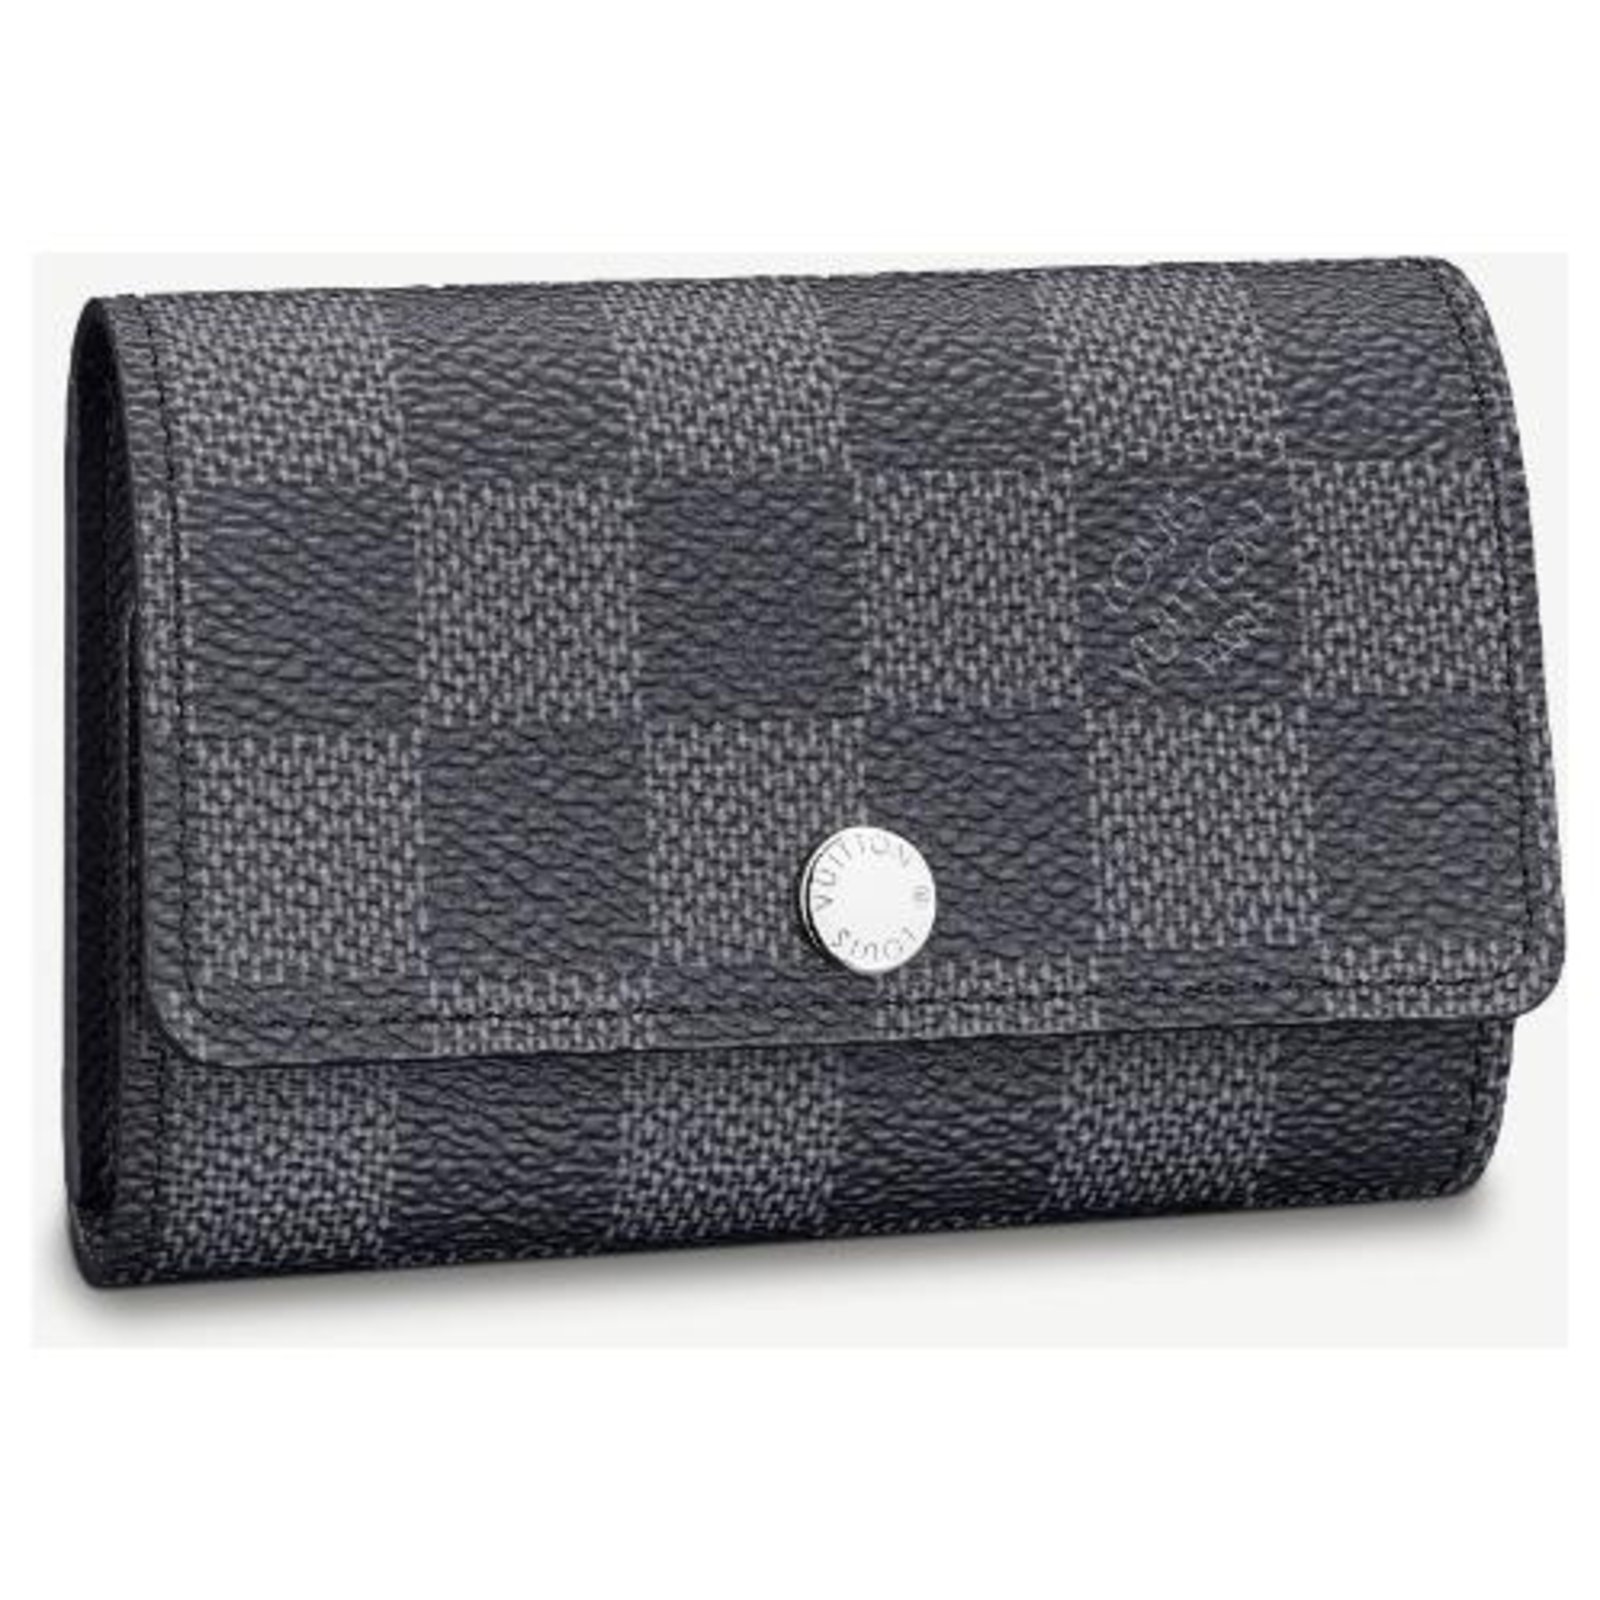 Pre-owned Marco Wallet Damier Graphite Black/grey